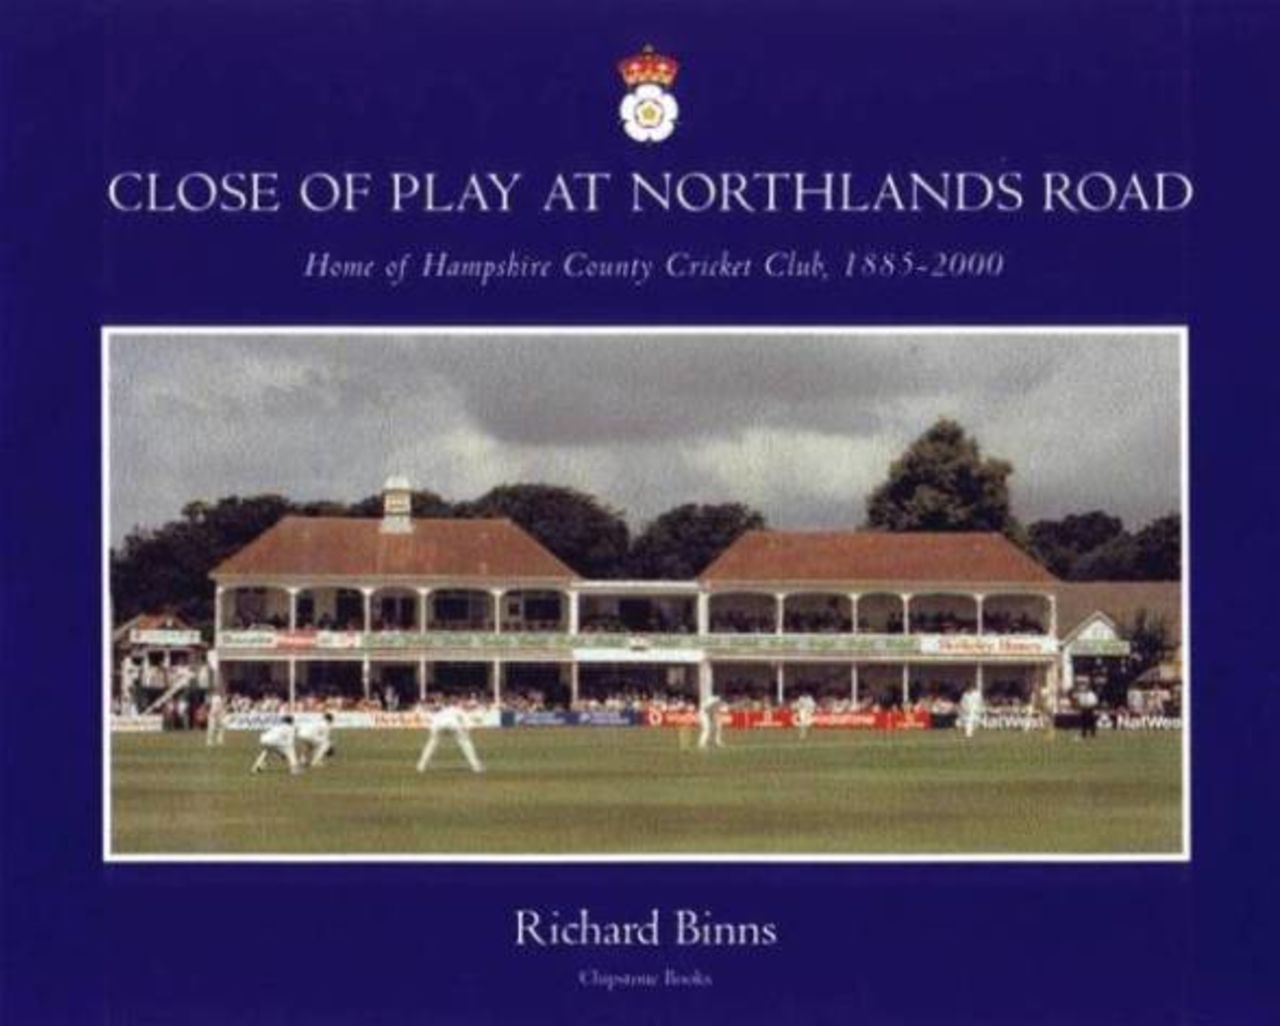 Close of Play at Northlands Road, Home of Hampshire County Cricket Club, 1885 - 2000